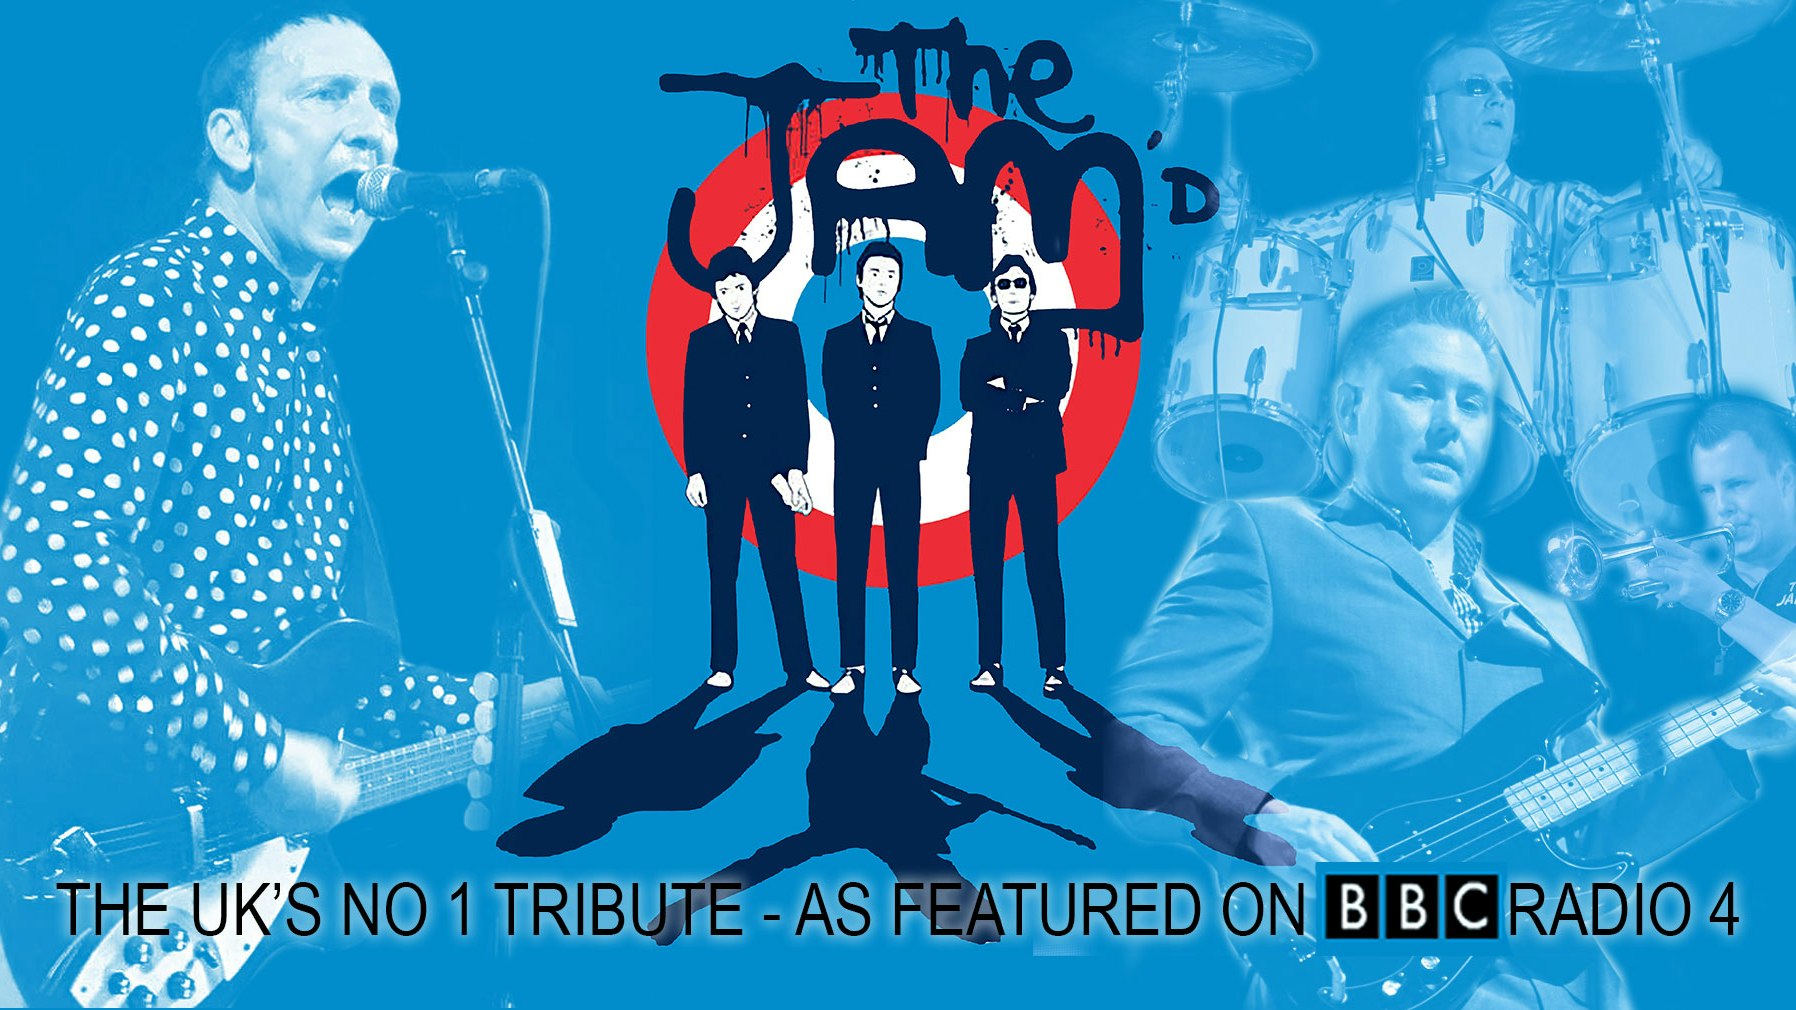 THE JAM’D | THE UK’S NO.1 TRIBUTE